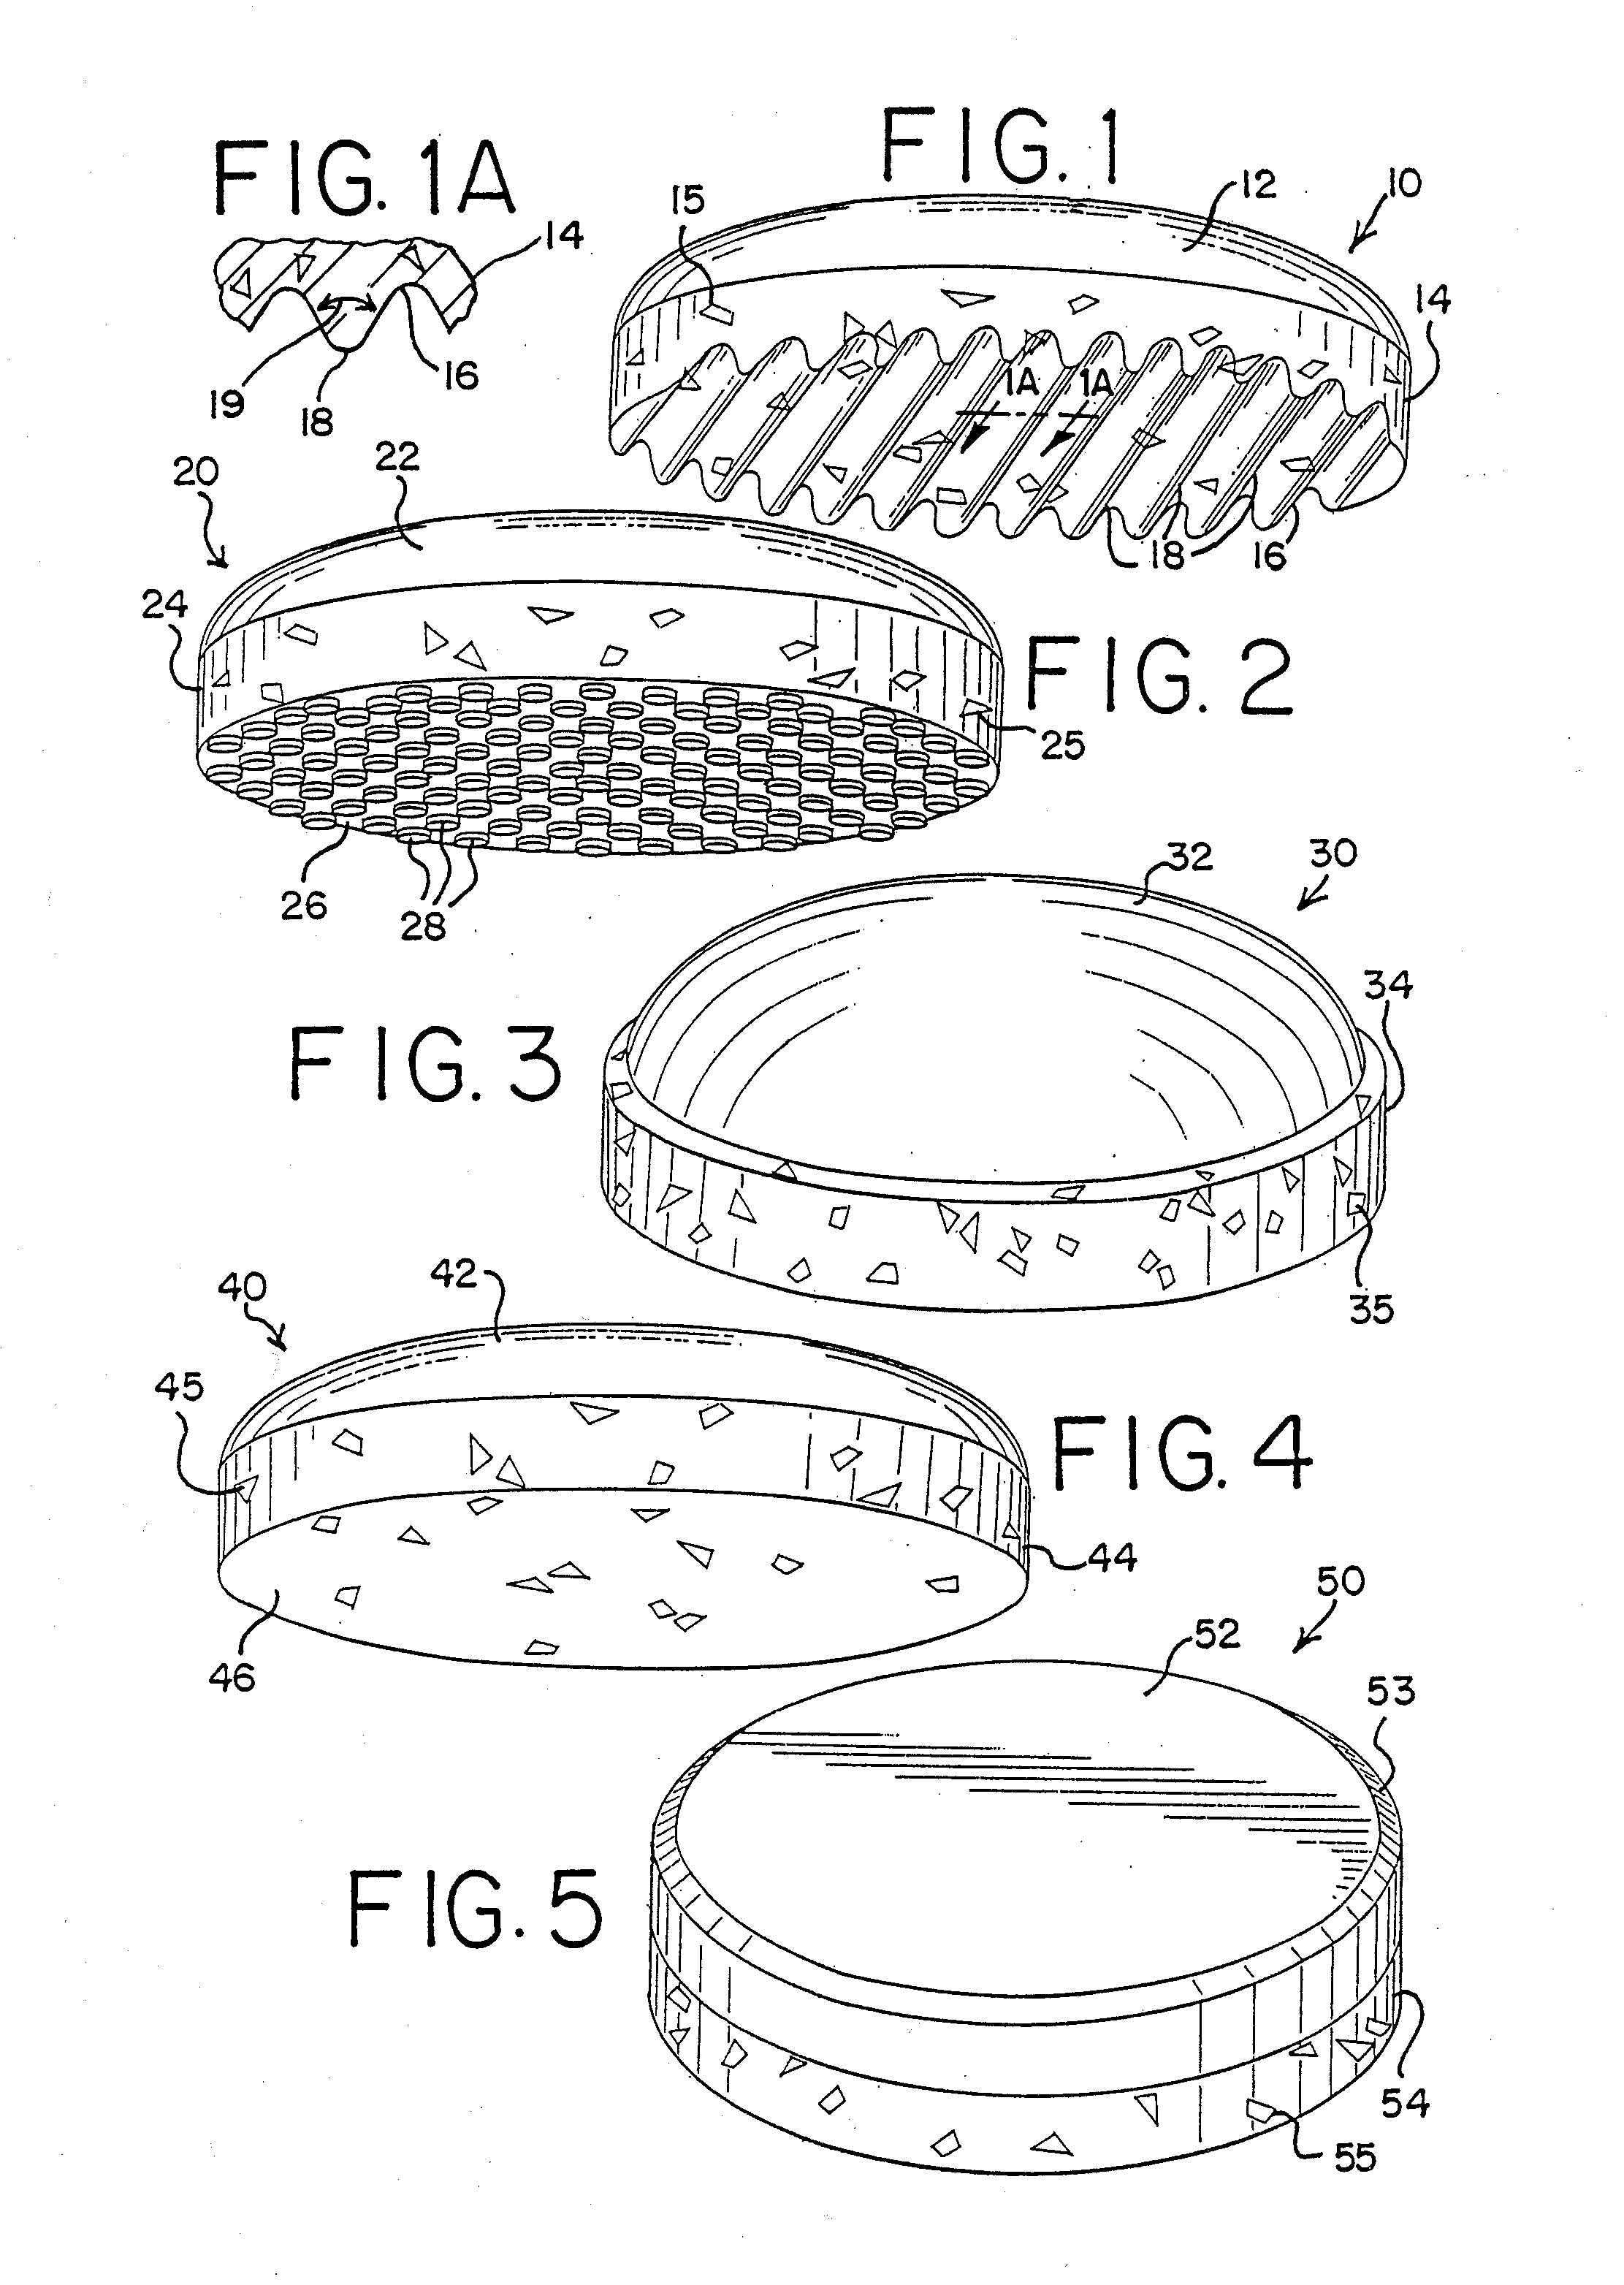 Breath freshening confectionery products and methods of making and using same